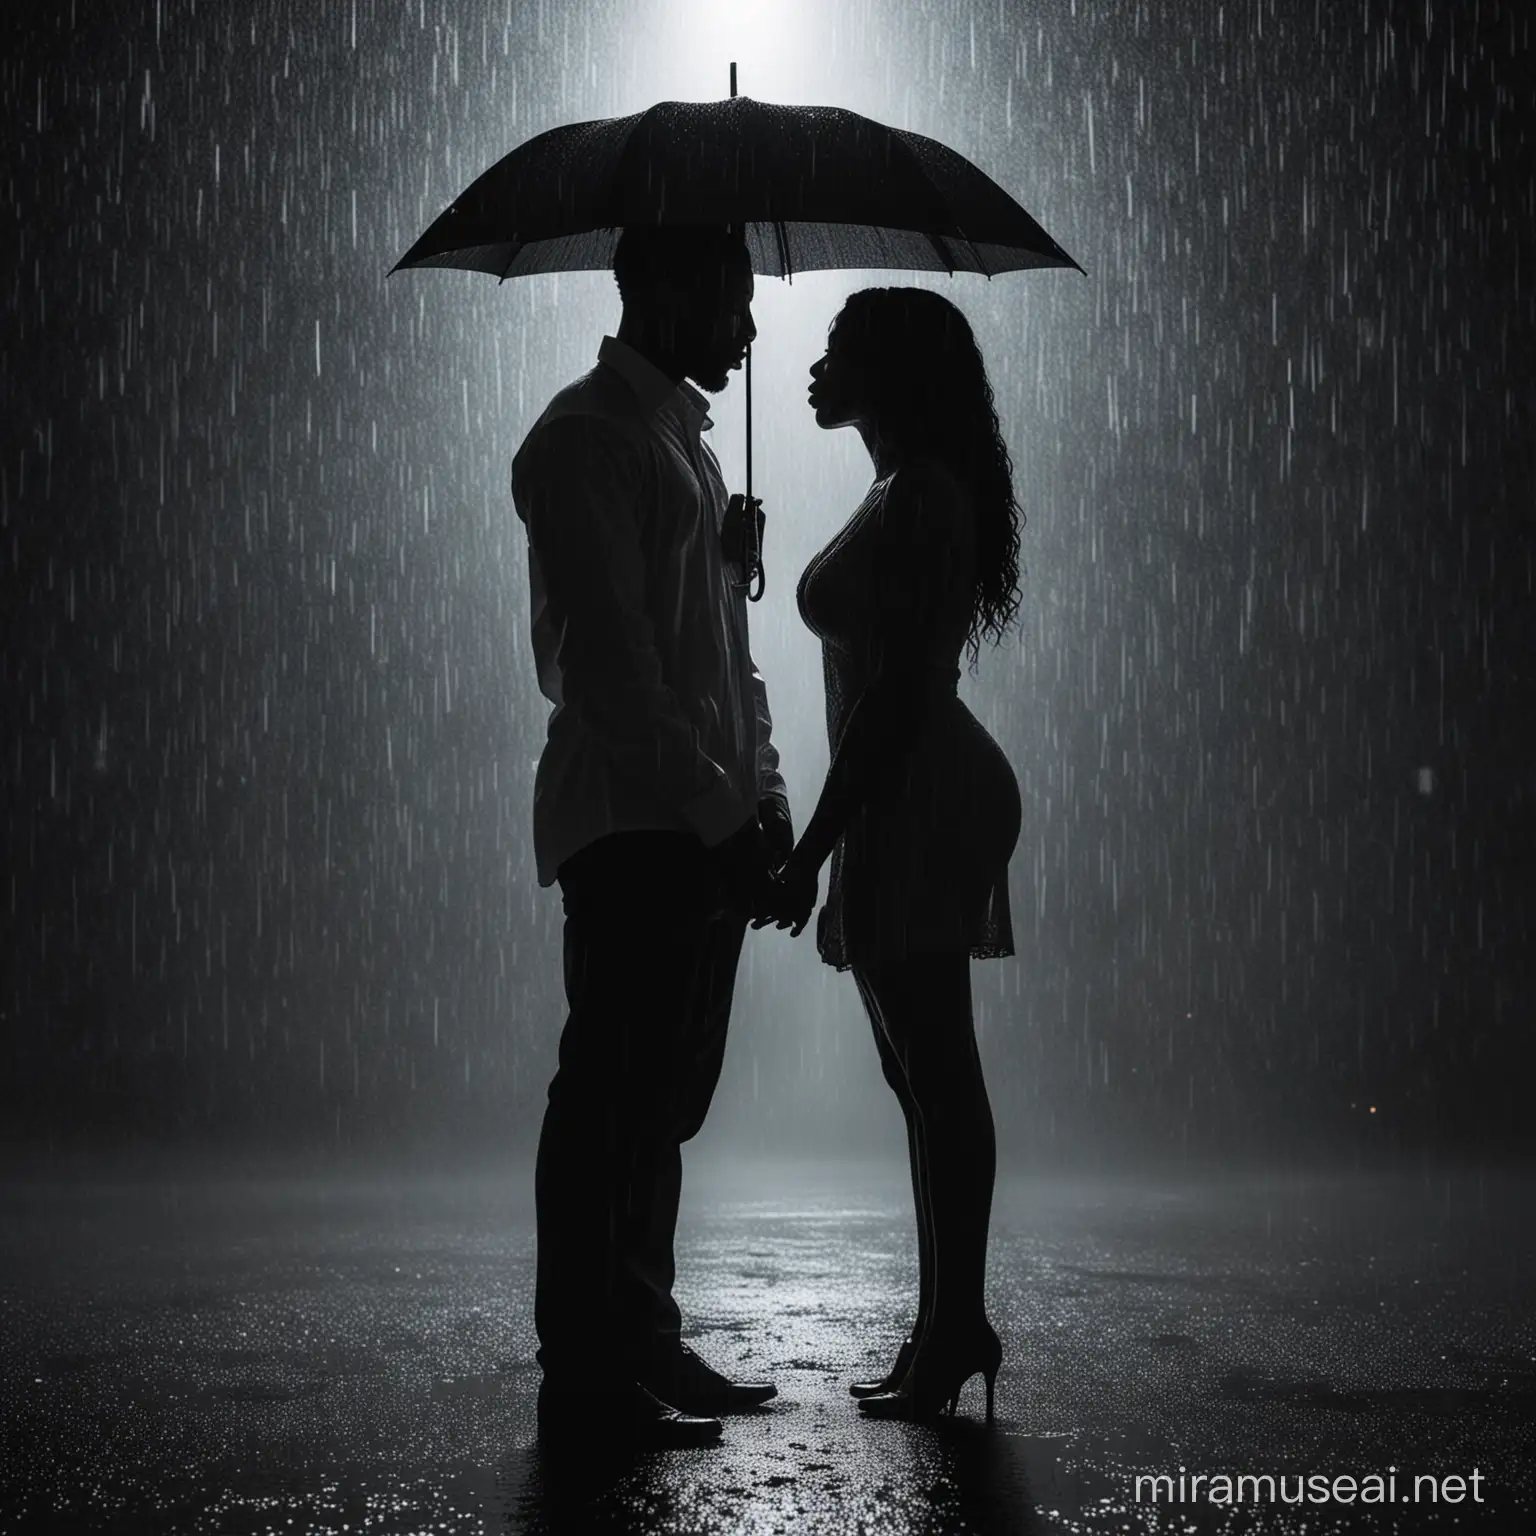  SHADOWY figures standing in the rain kissing of  MELANIN WOMAN and man IN THE DARK 